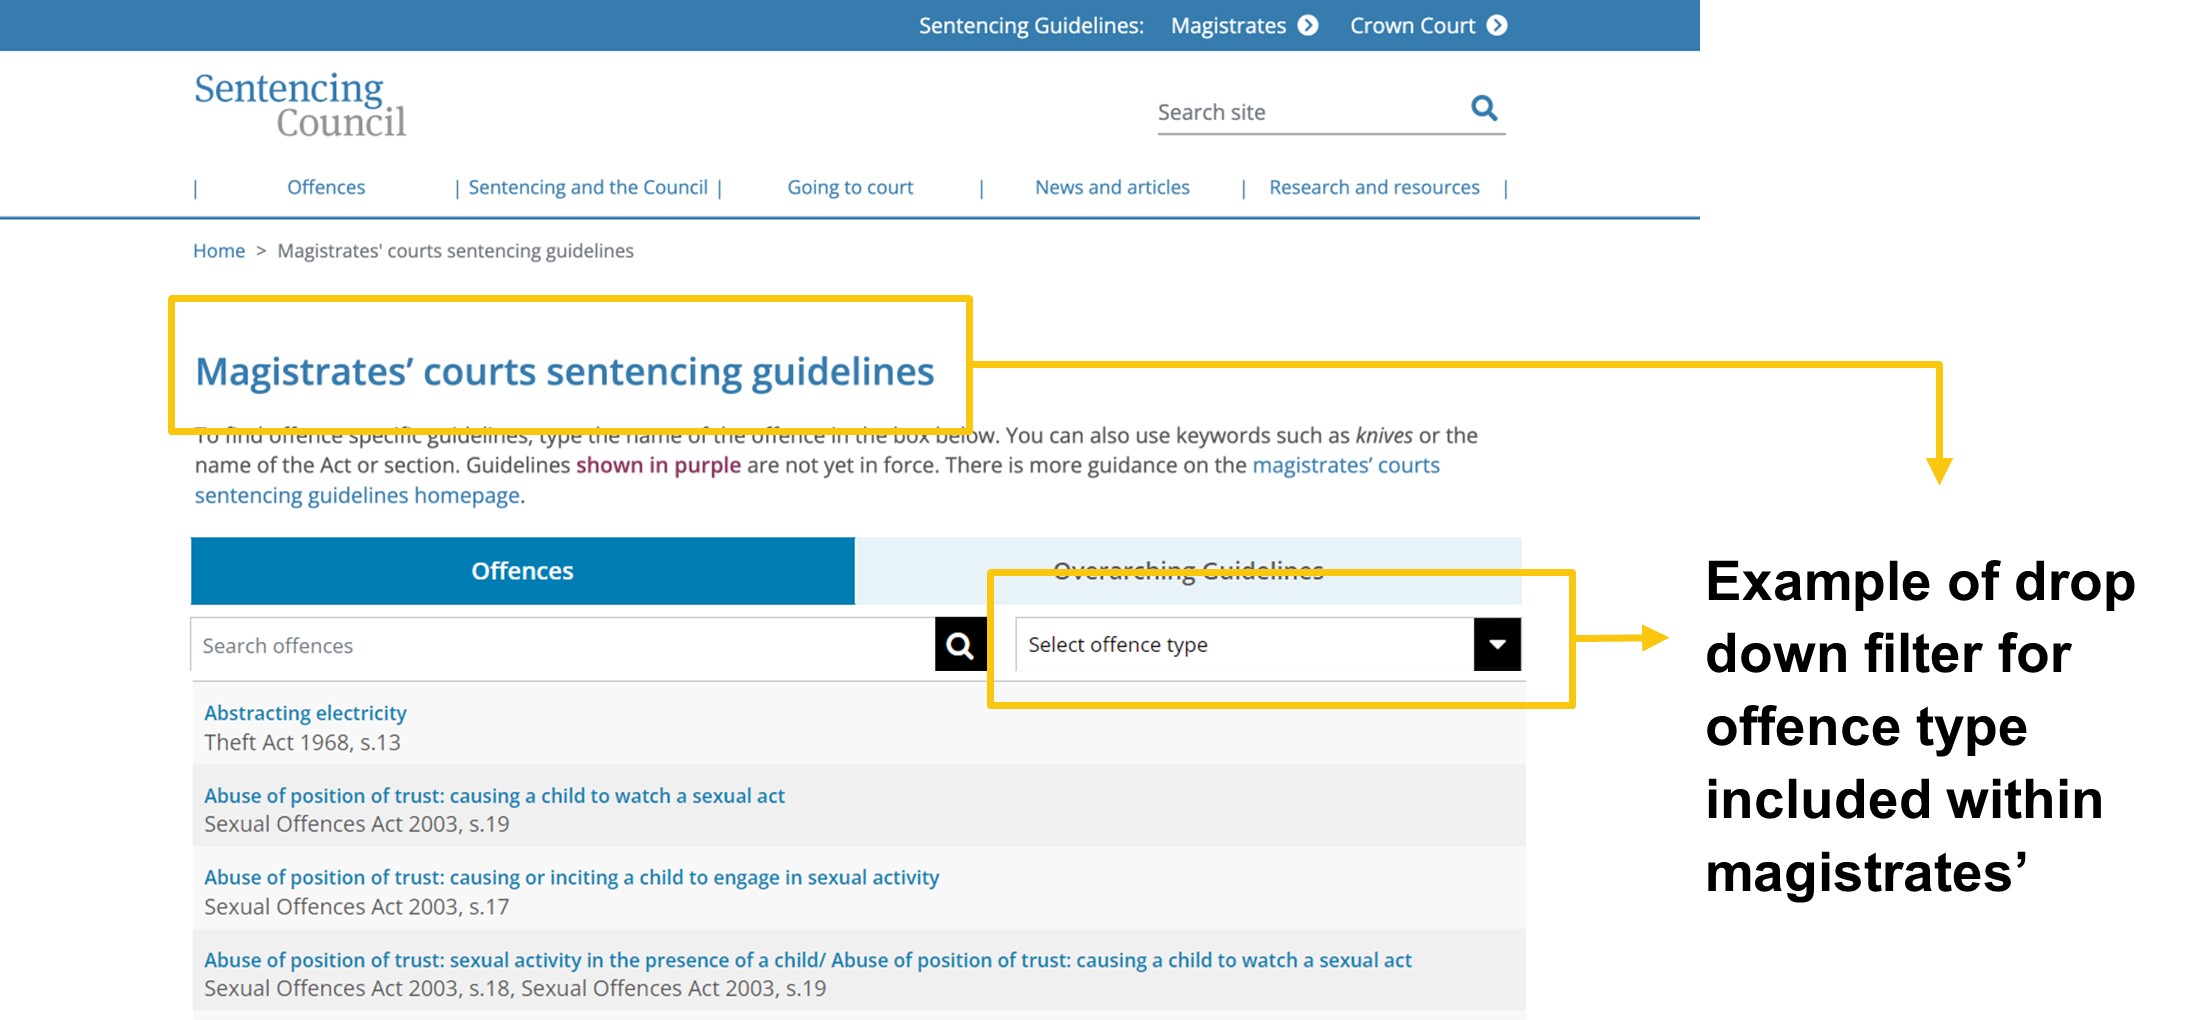 Image showing a mock up of recommendation A4. The magistrates' courts guidelines have a drop down filter by offence type